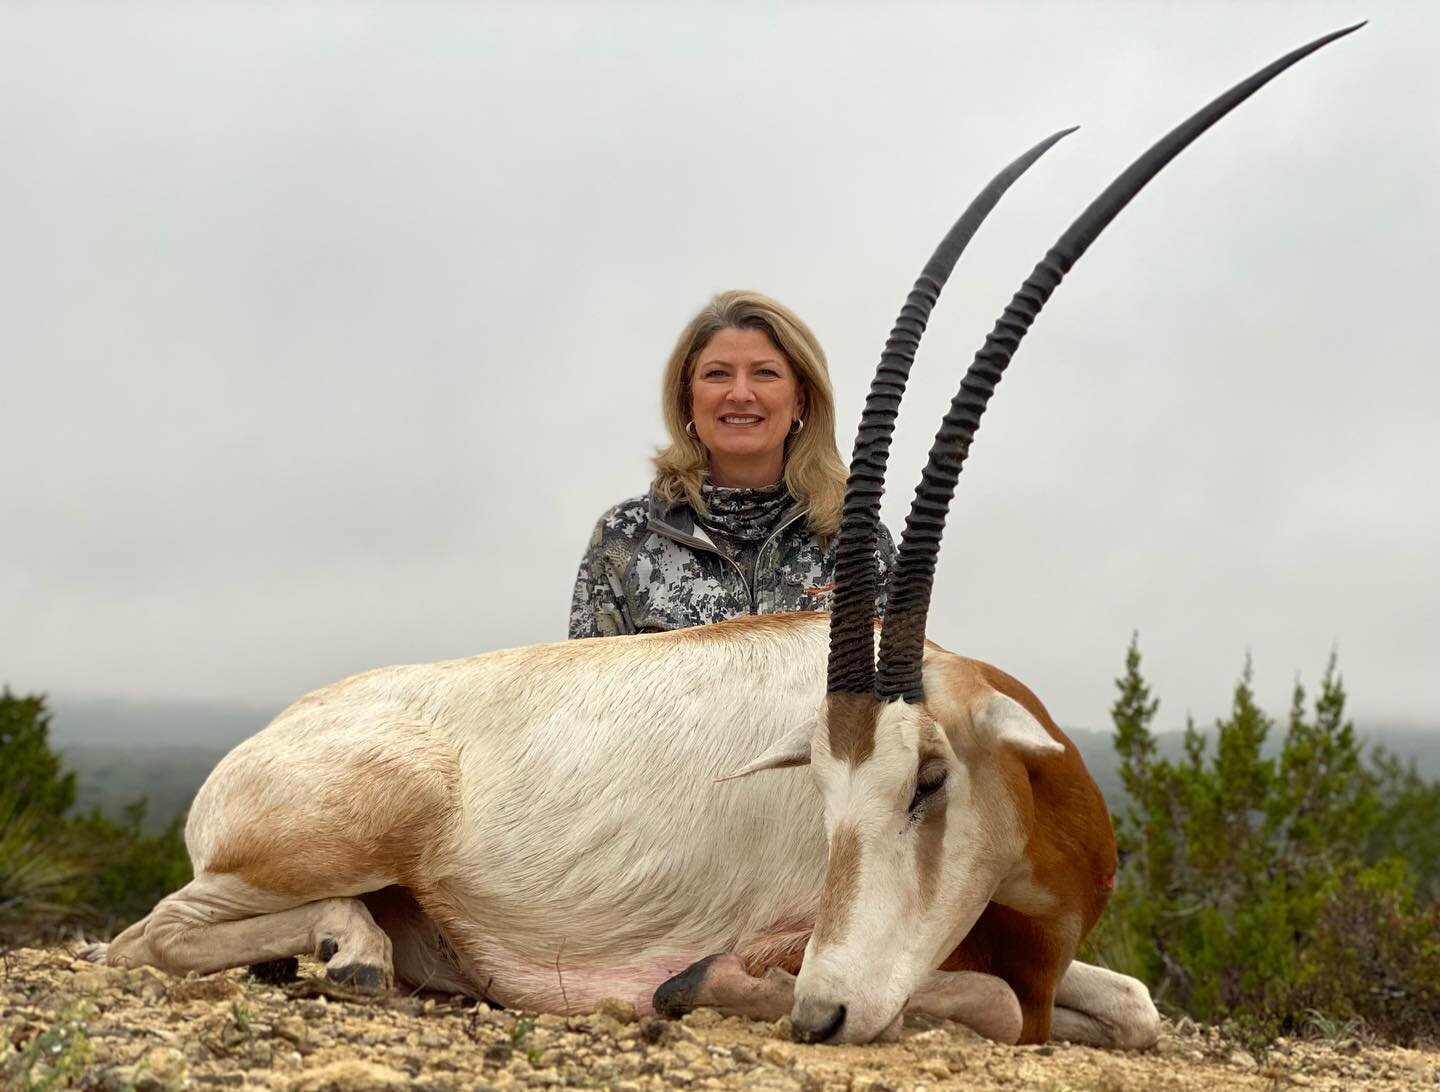 What an awesome Scimitar Bull! Mrs. Alldredge hunted with us on a She Hunt Skill Camp ! Enjoy your awesome trophy and delicious cuisine. 

Guide - Ethan Cook 

If you want to hunt Scimitar or one of the 50 + species here, give us a shout. We would lo